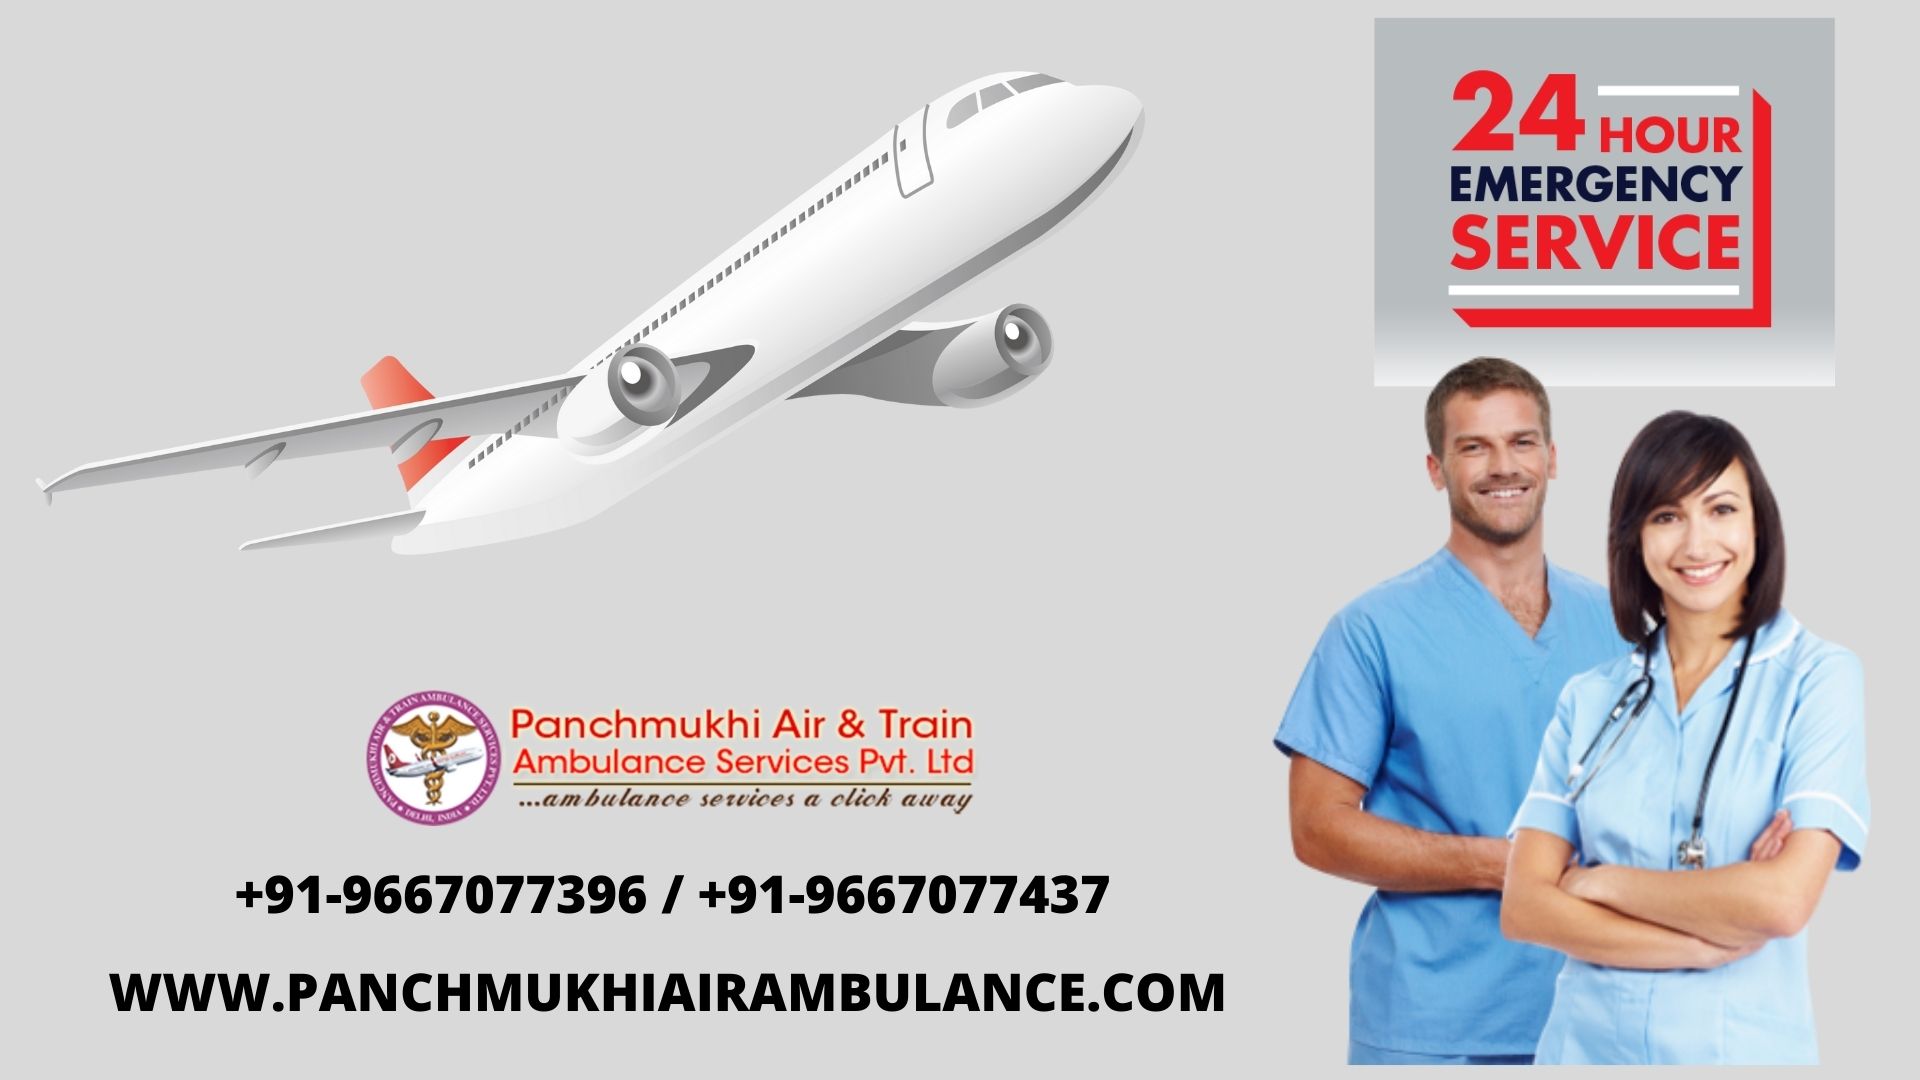 Get Air Ambulance Service in Gorakhpur with All Medical Accessories